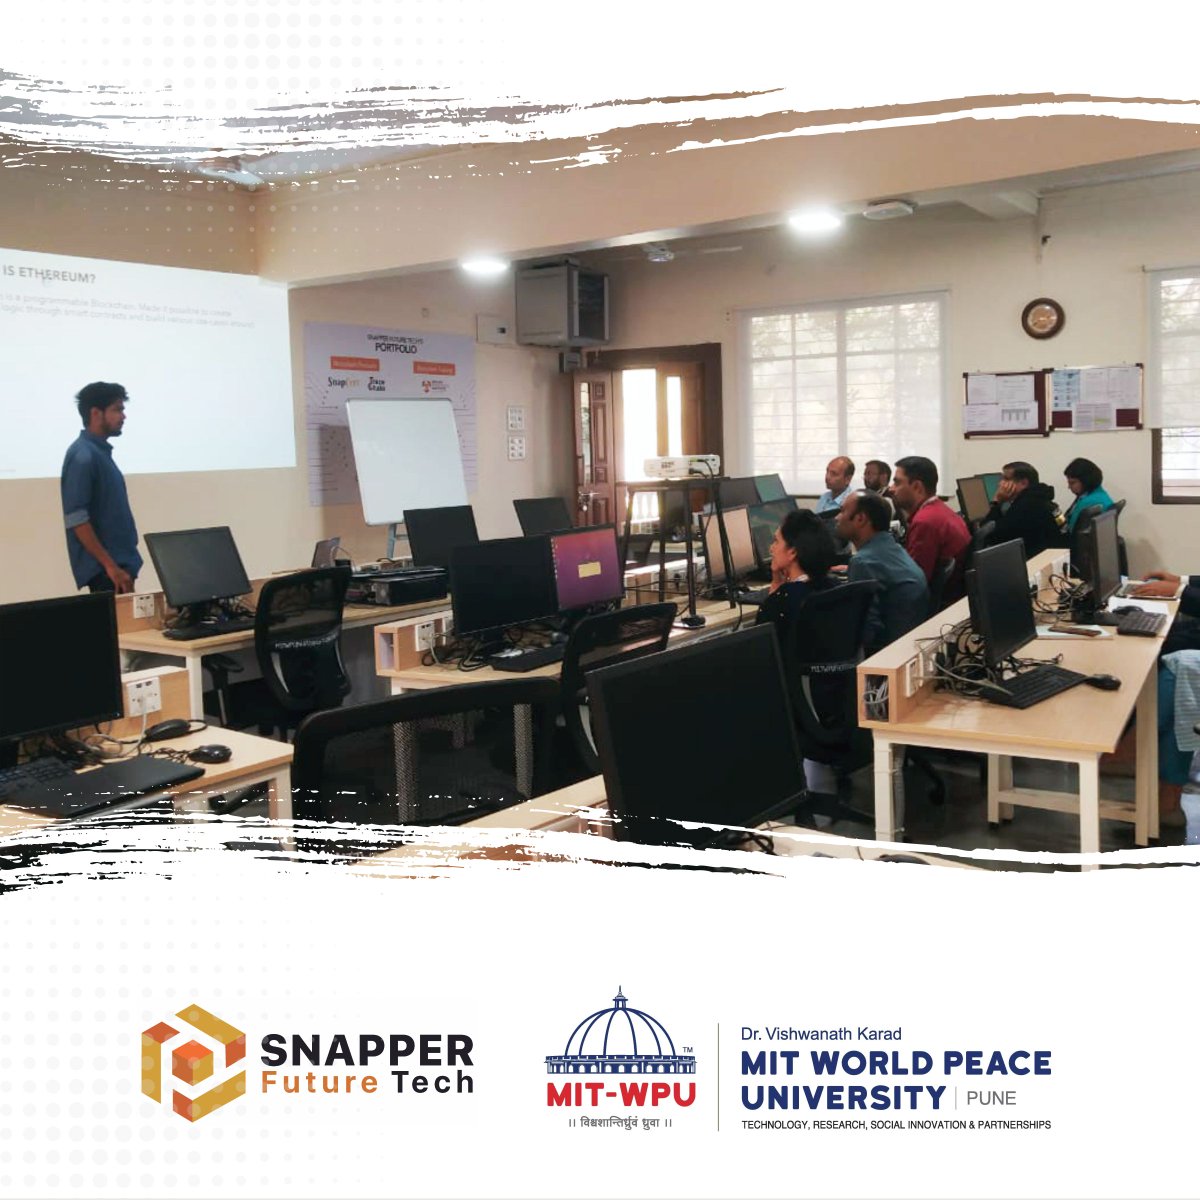 The Indian Blockchain Institute is extremely pleased to announce the successful completion of the Faculty Development Program at #mitwpu

#blockchain #blockchaineducation #ethereum #polygon #smartcontracts #blockchainrevolution #binance #web3 #metaverse #btc #ibi